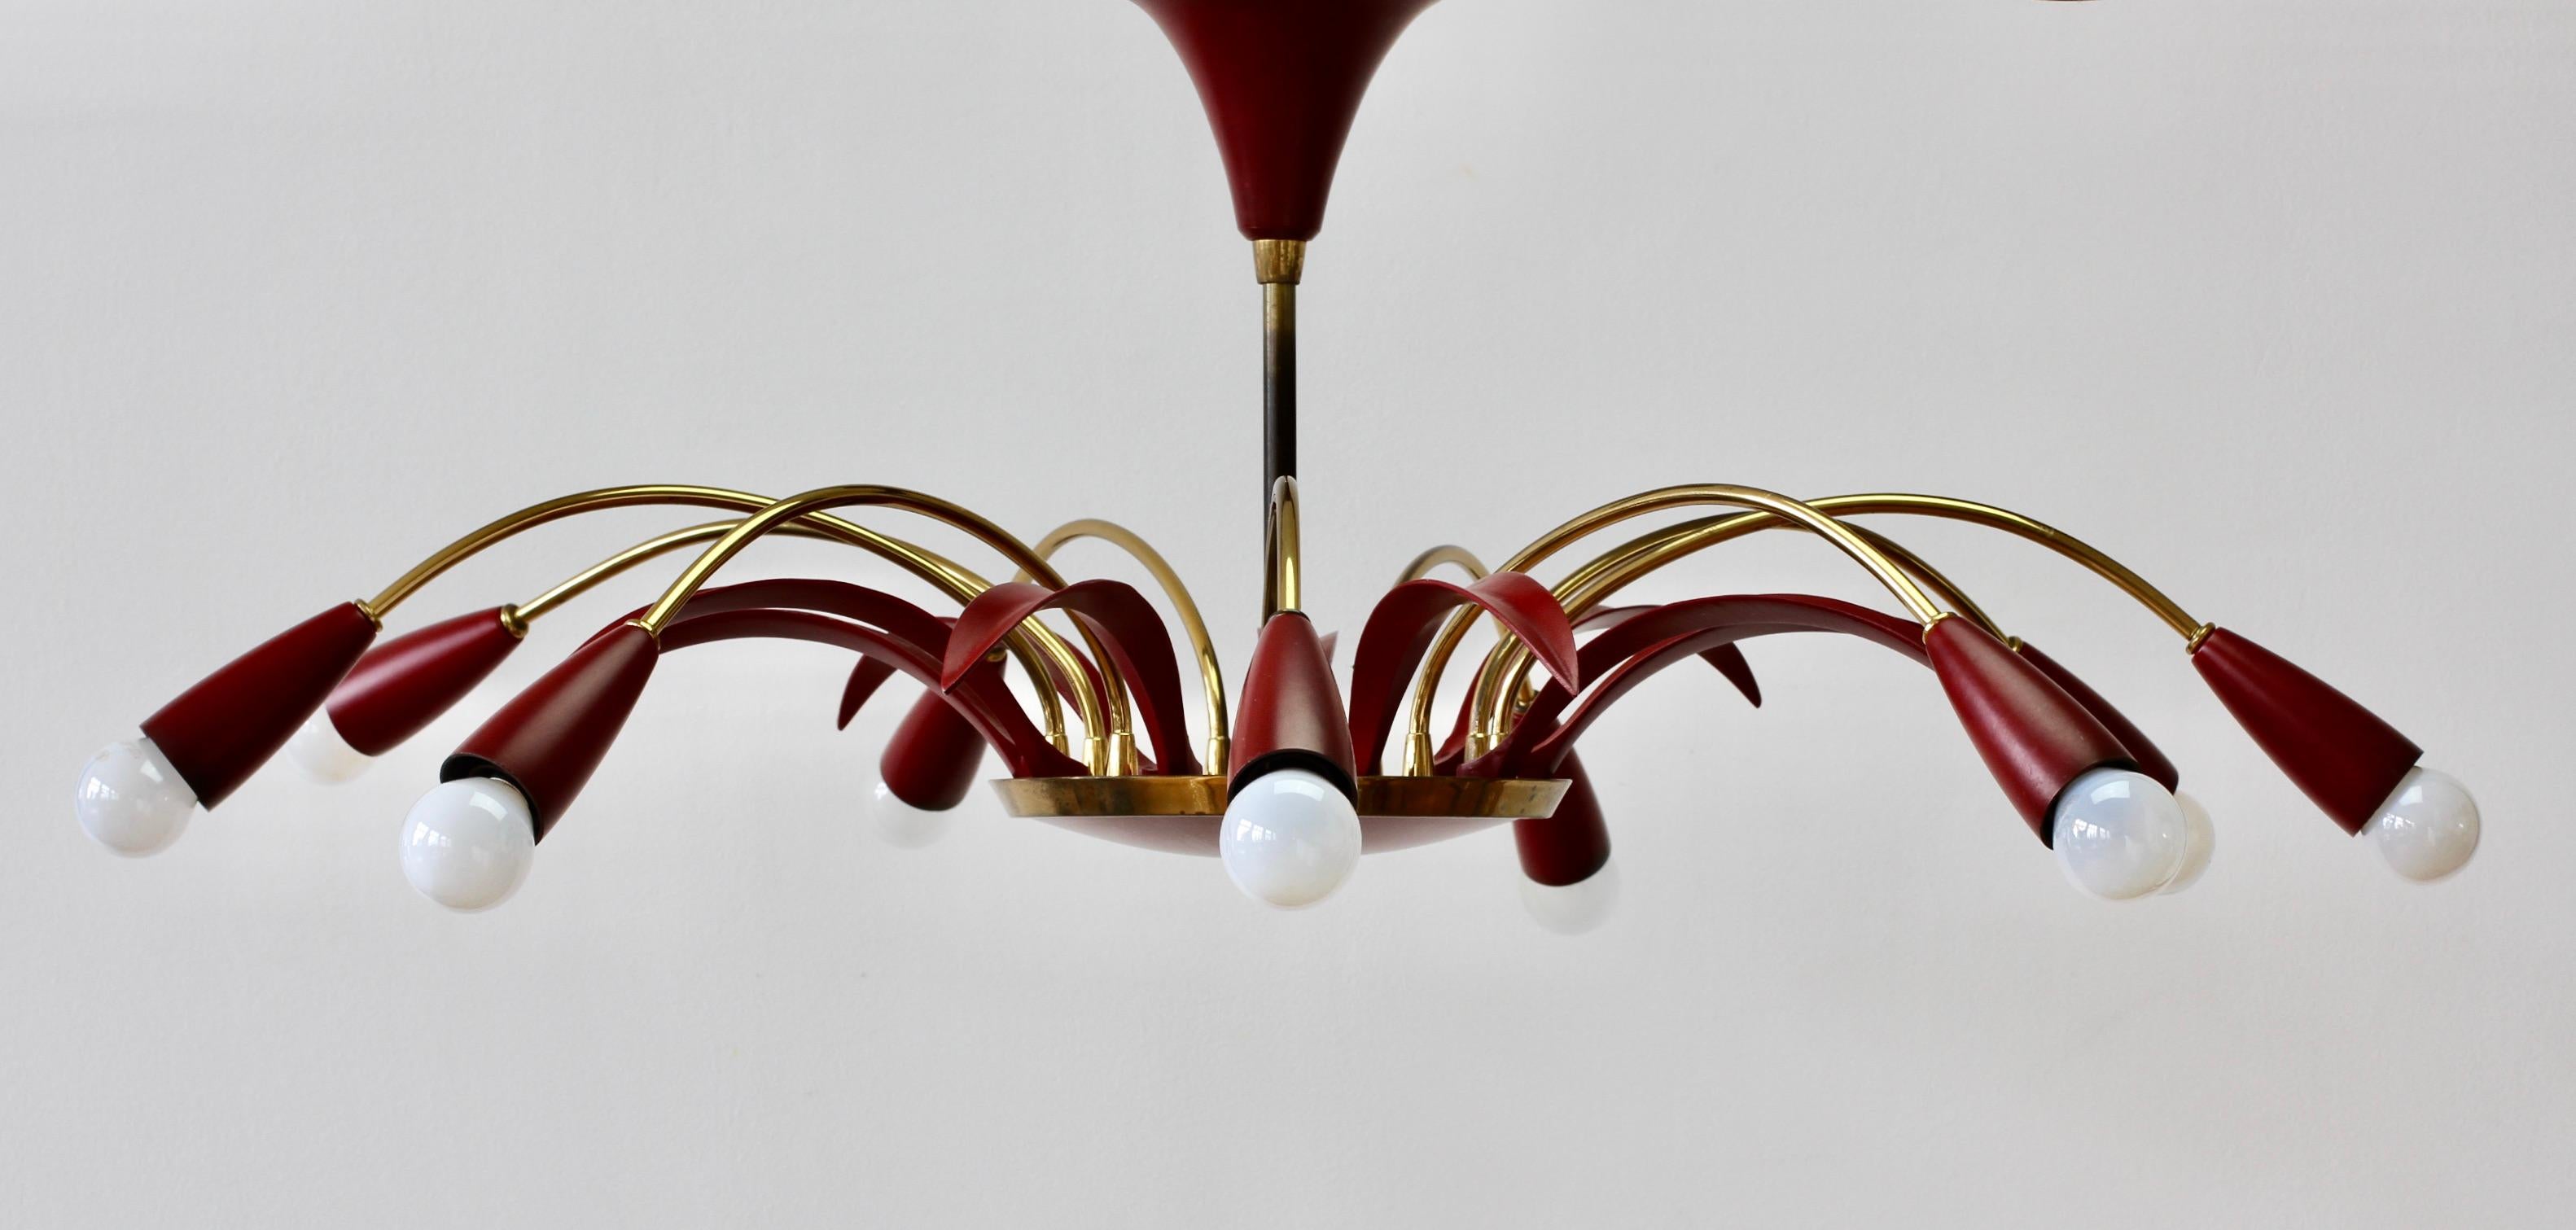 Painted 1950s Stilnovo Style Brass and Red Nine Arm Chandelier or Pendant Light Fixture